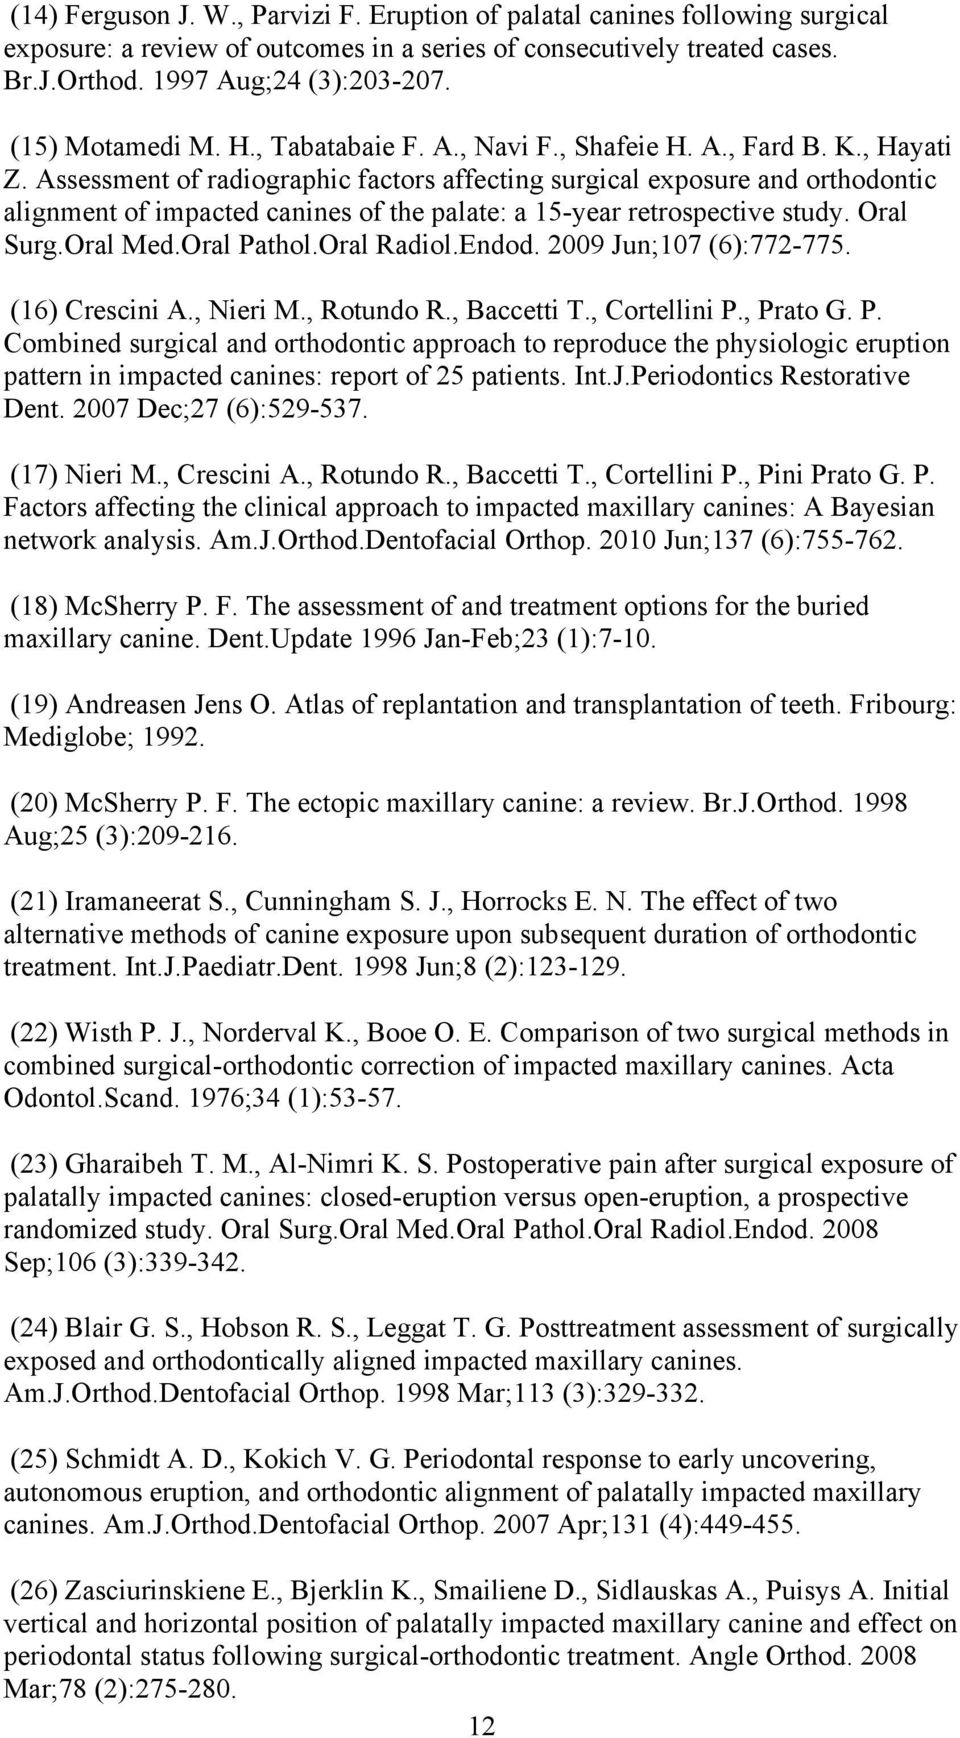 Assessment of radiographic factors affecting surgical exposure and orthodontic alignment of impacted canines of the palate: a 15-year retrospective study. Oral Surg.Oral Med.Oral Pathol.Oral Radiol.